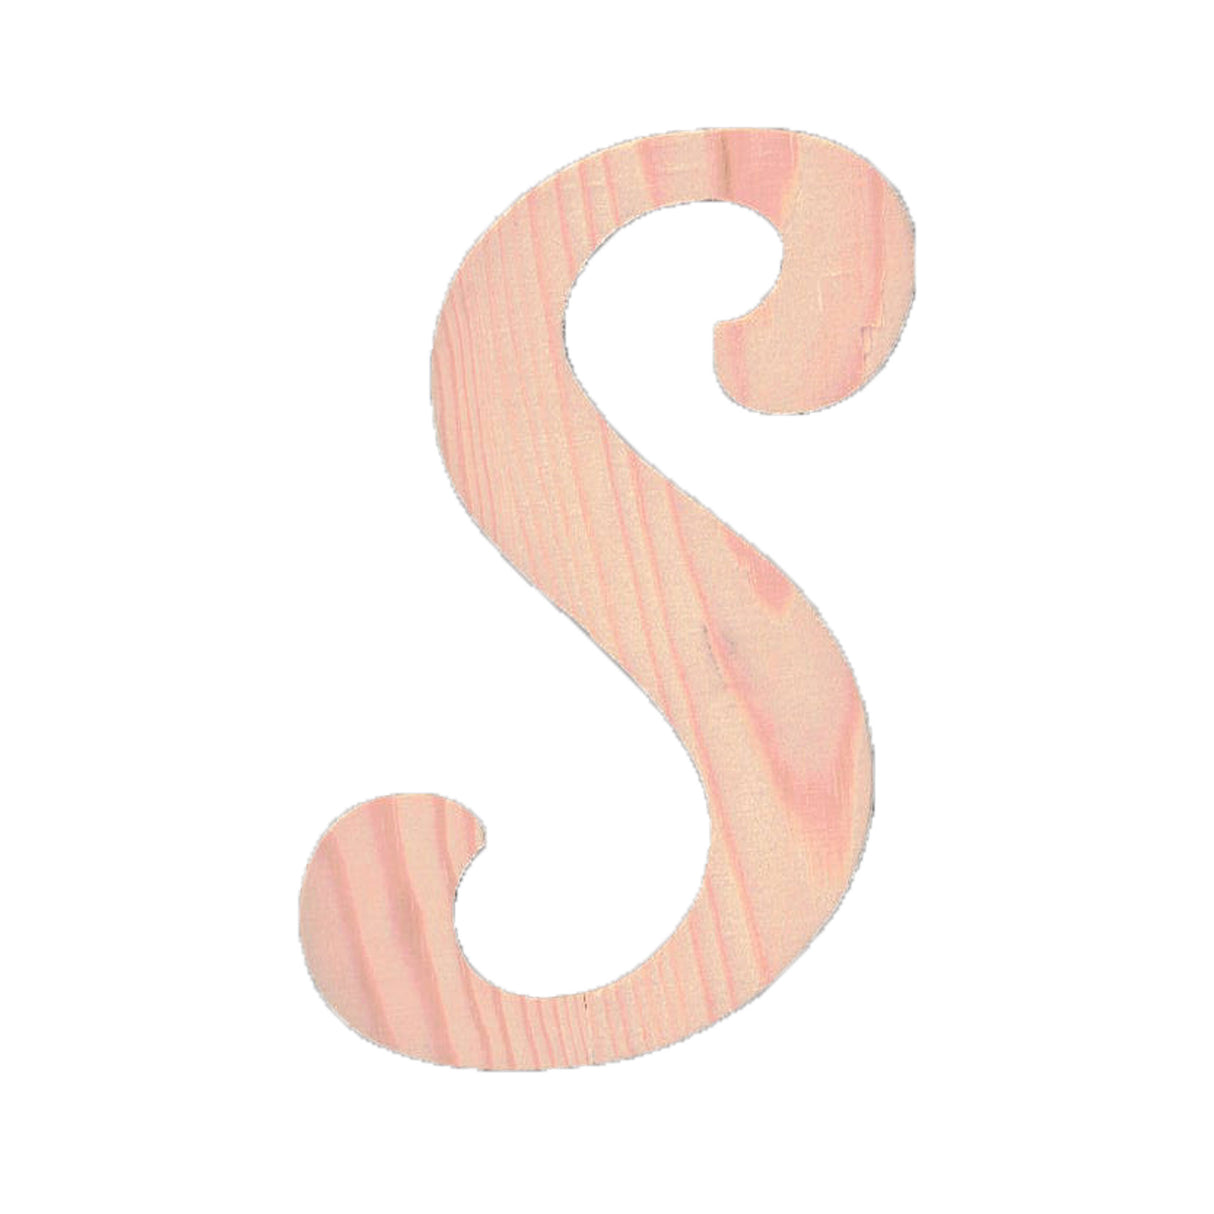 Unfinished Wooden Playball Italic Letter S (6.25 Inches) in Beige color,  shape